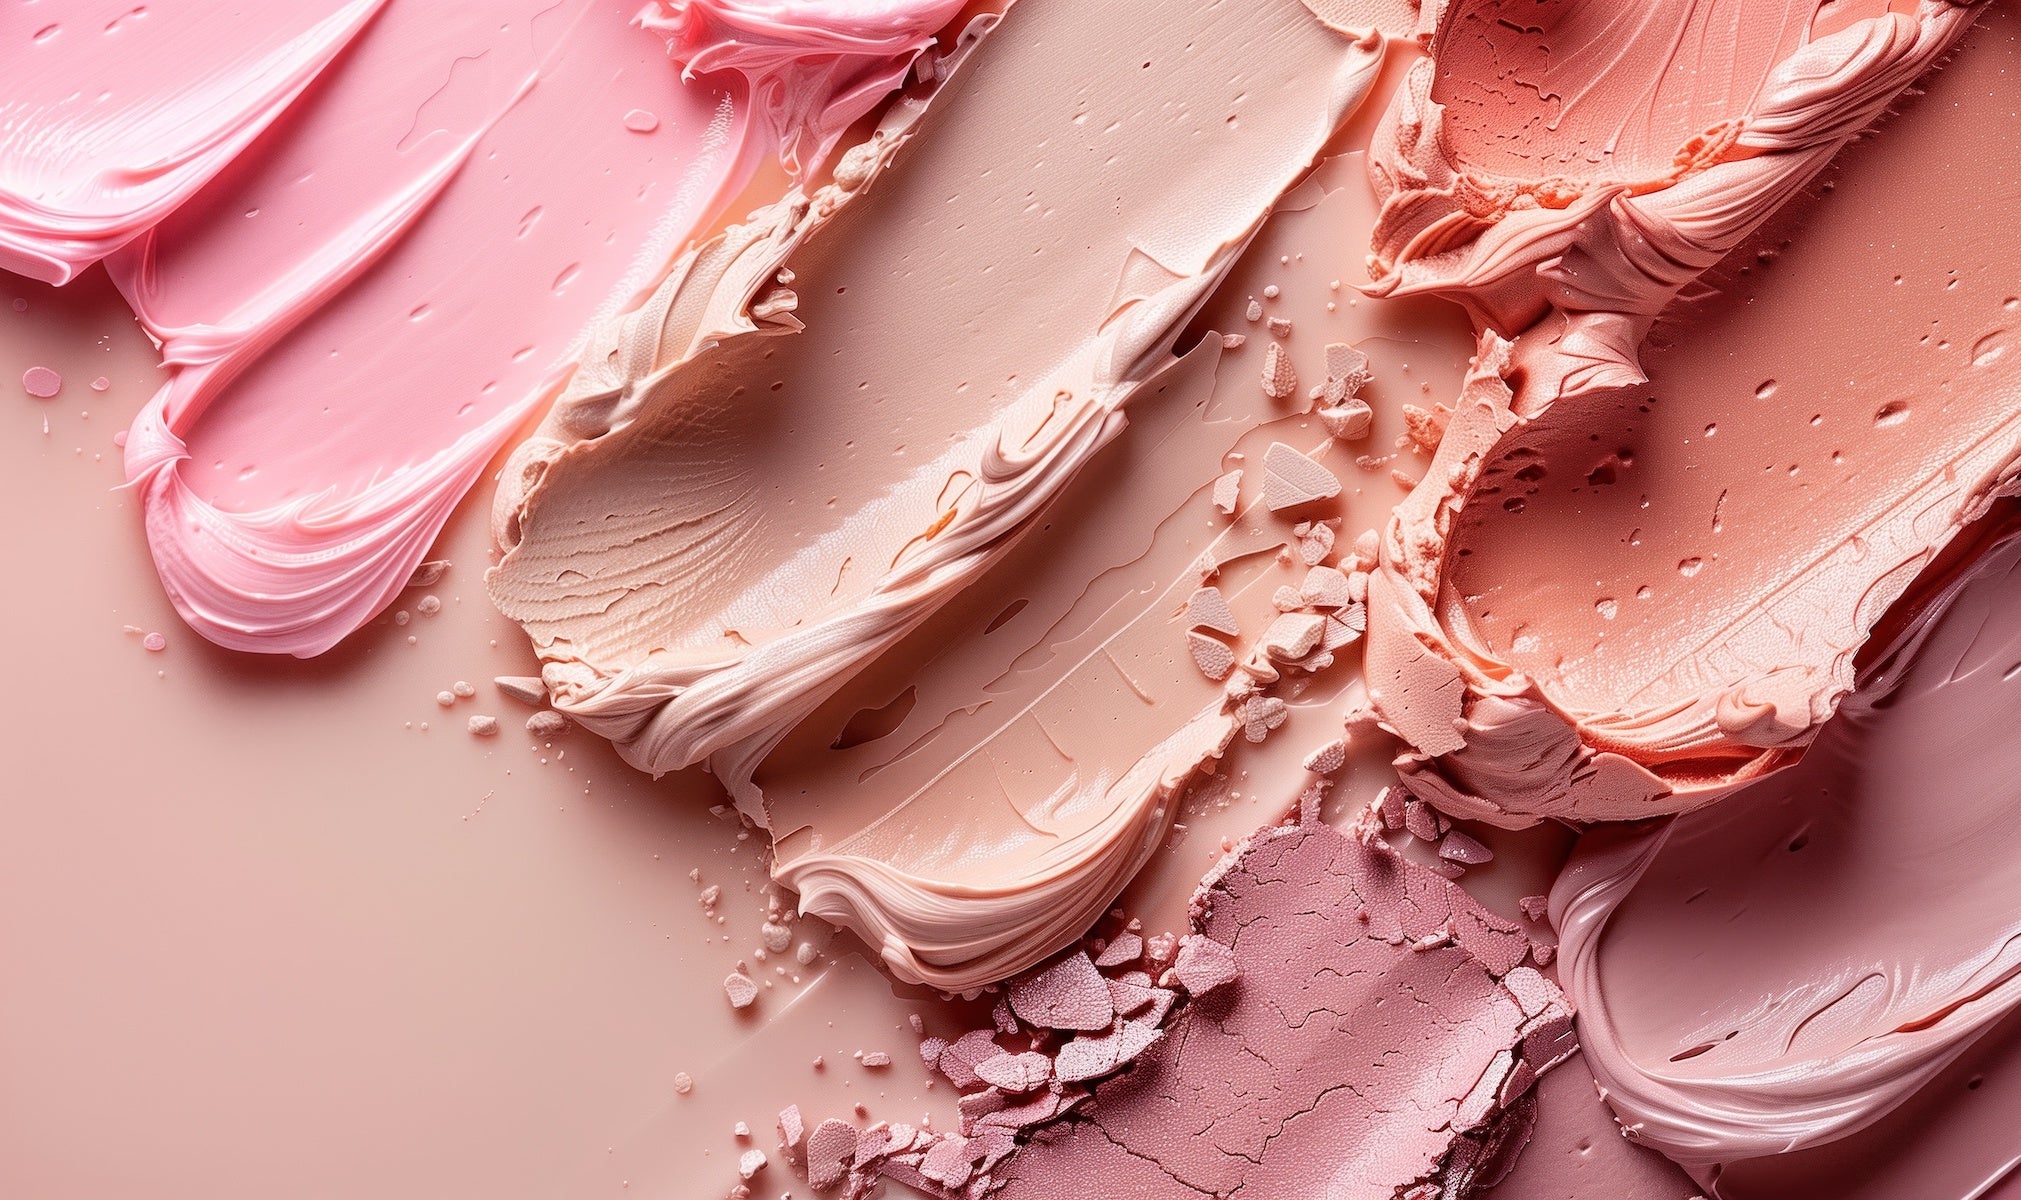 How to Choose the Best Makeup Colors for Your Complexion